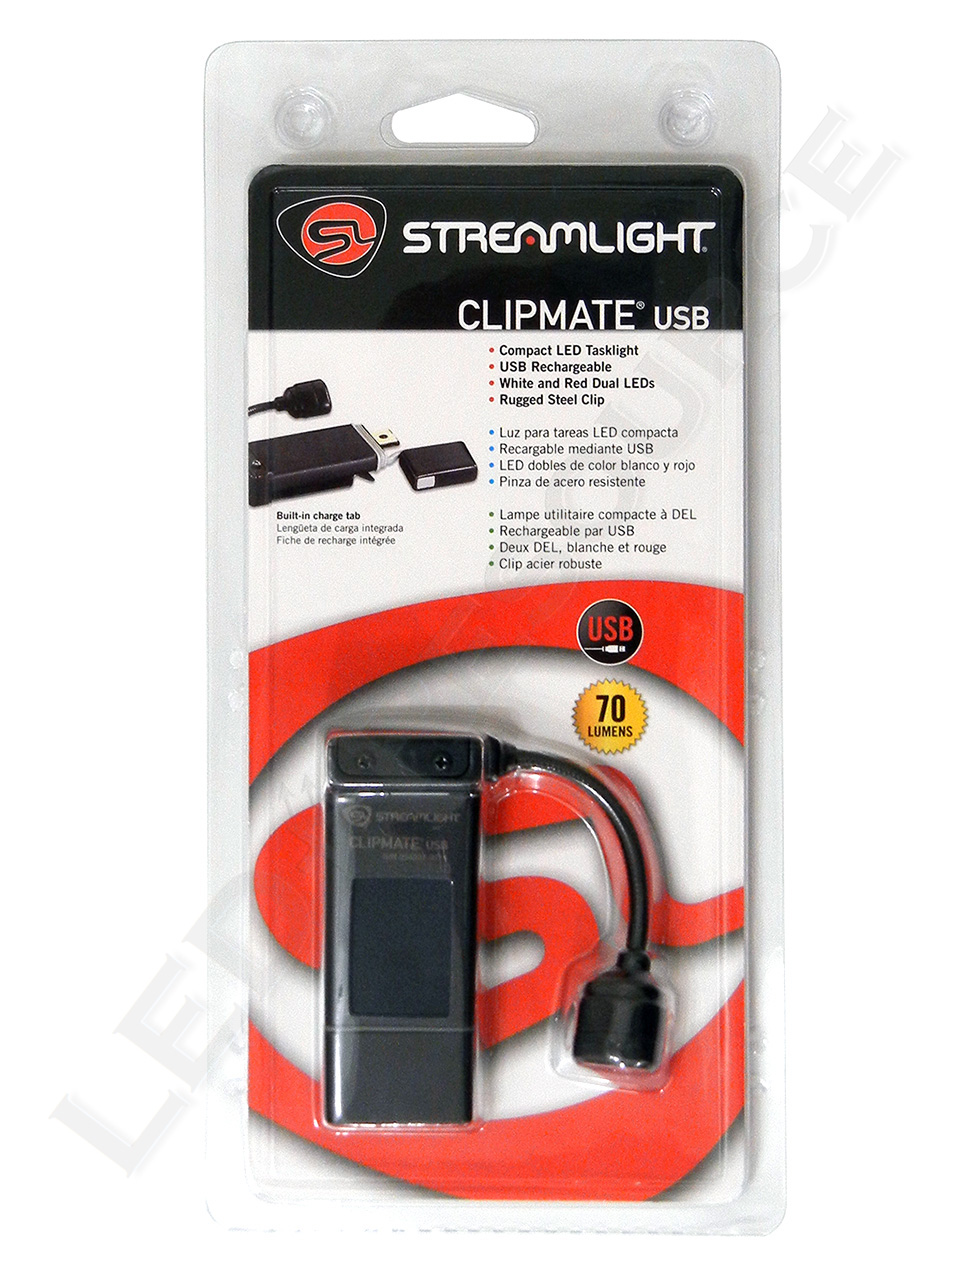 how to recharge streamlight clipmate